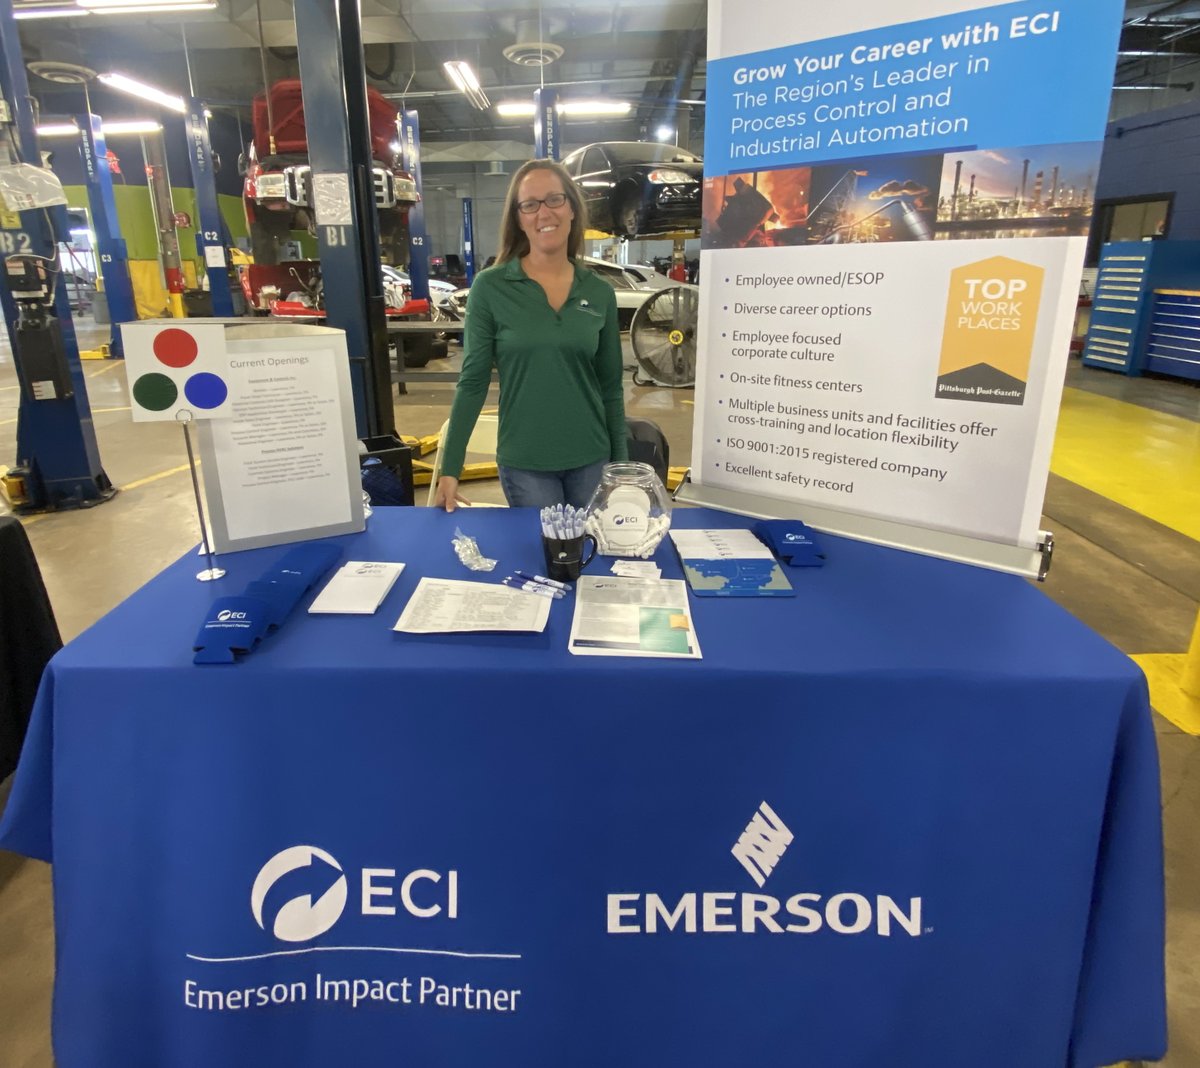 We attended recent @RosedaleTech career fair! There are many career paths available to graduating students who are ready to join the workforce. We are proud to introduce students to career opportunities at ECI! #TopWorkplace #GreatCompaniesHireGreatPeople eci.us/careers/